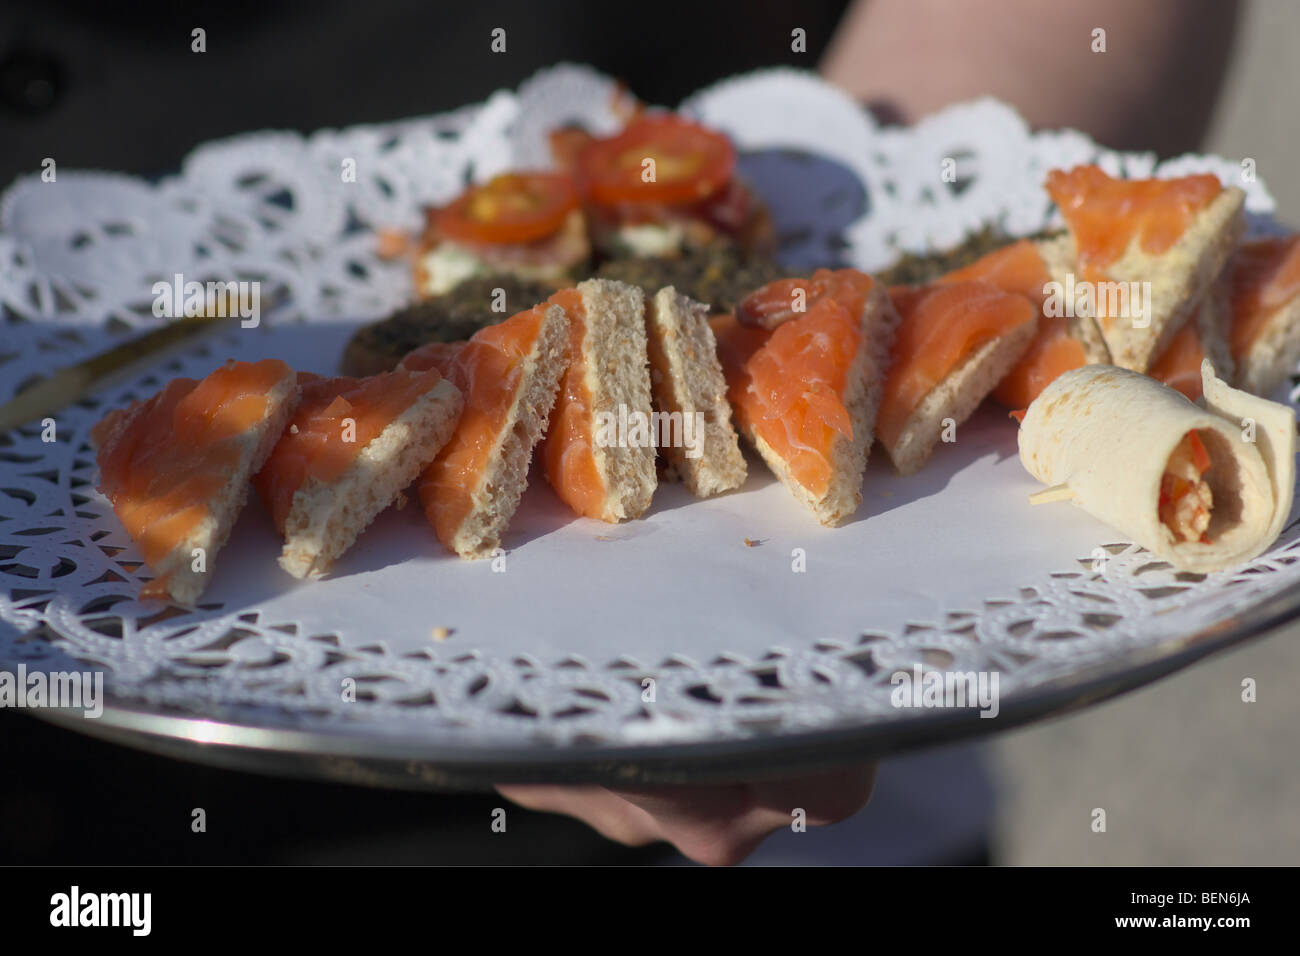 A tray of smoked salmon canapés served at a garden party Stock Photo